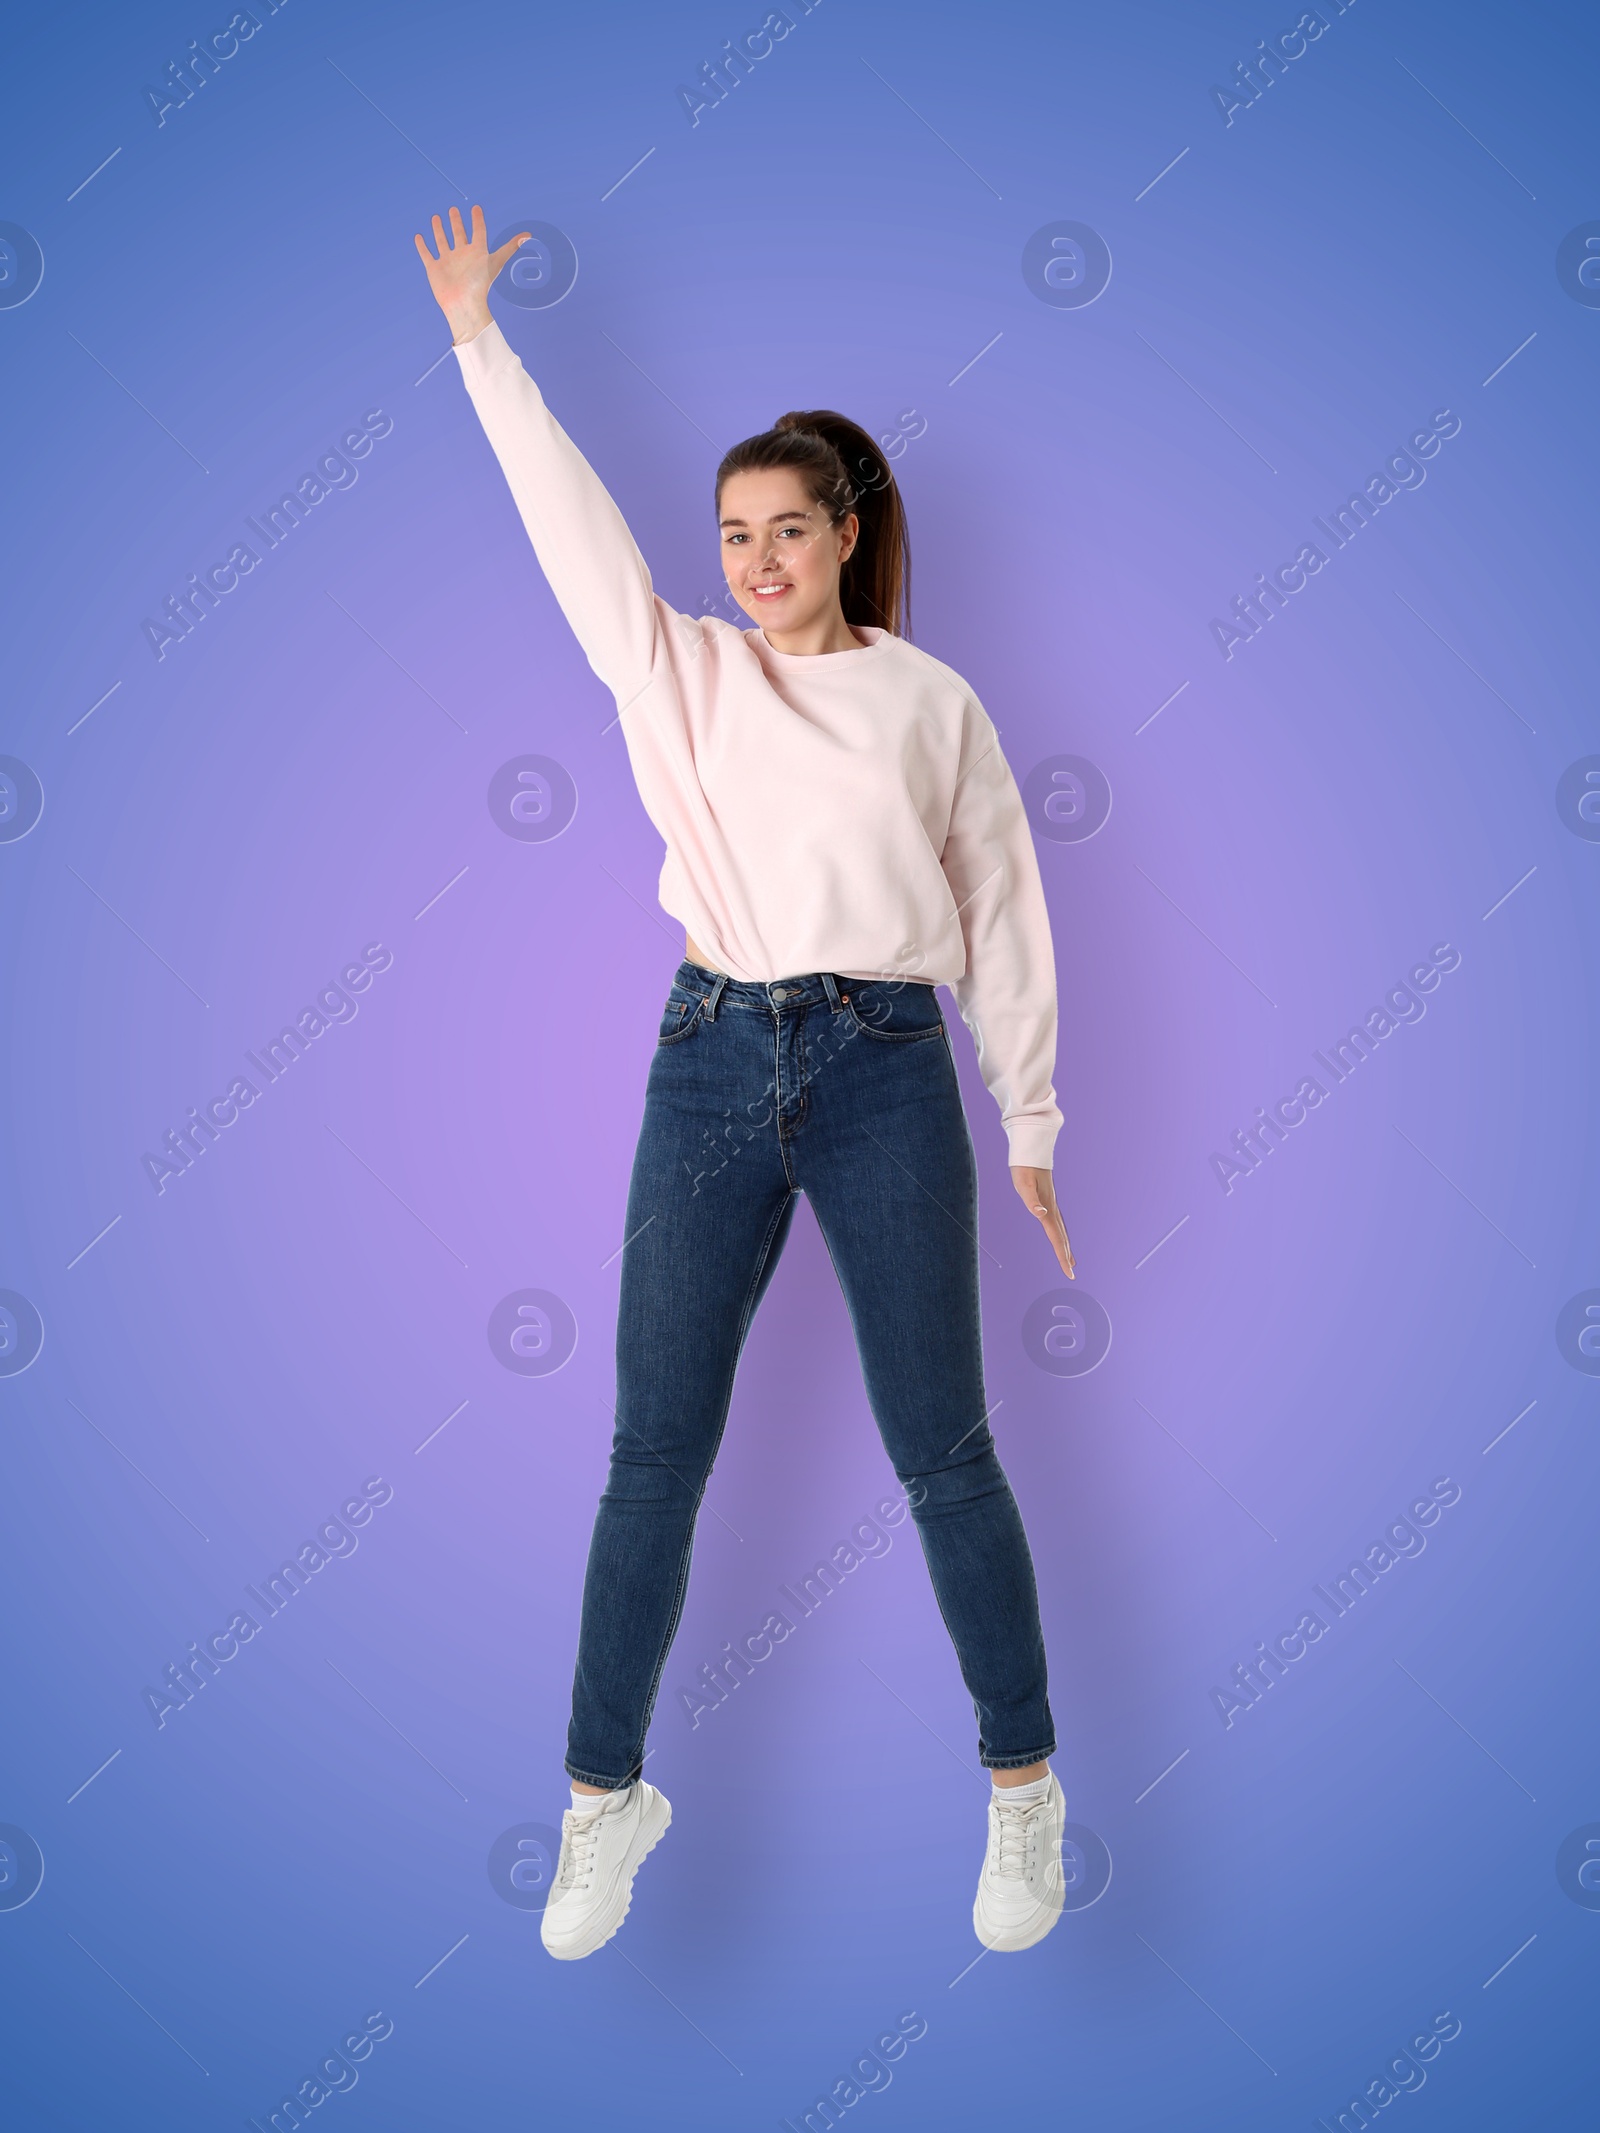 Image of Positive young woman jumping on purple blue gradient background